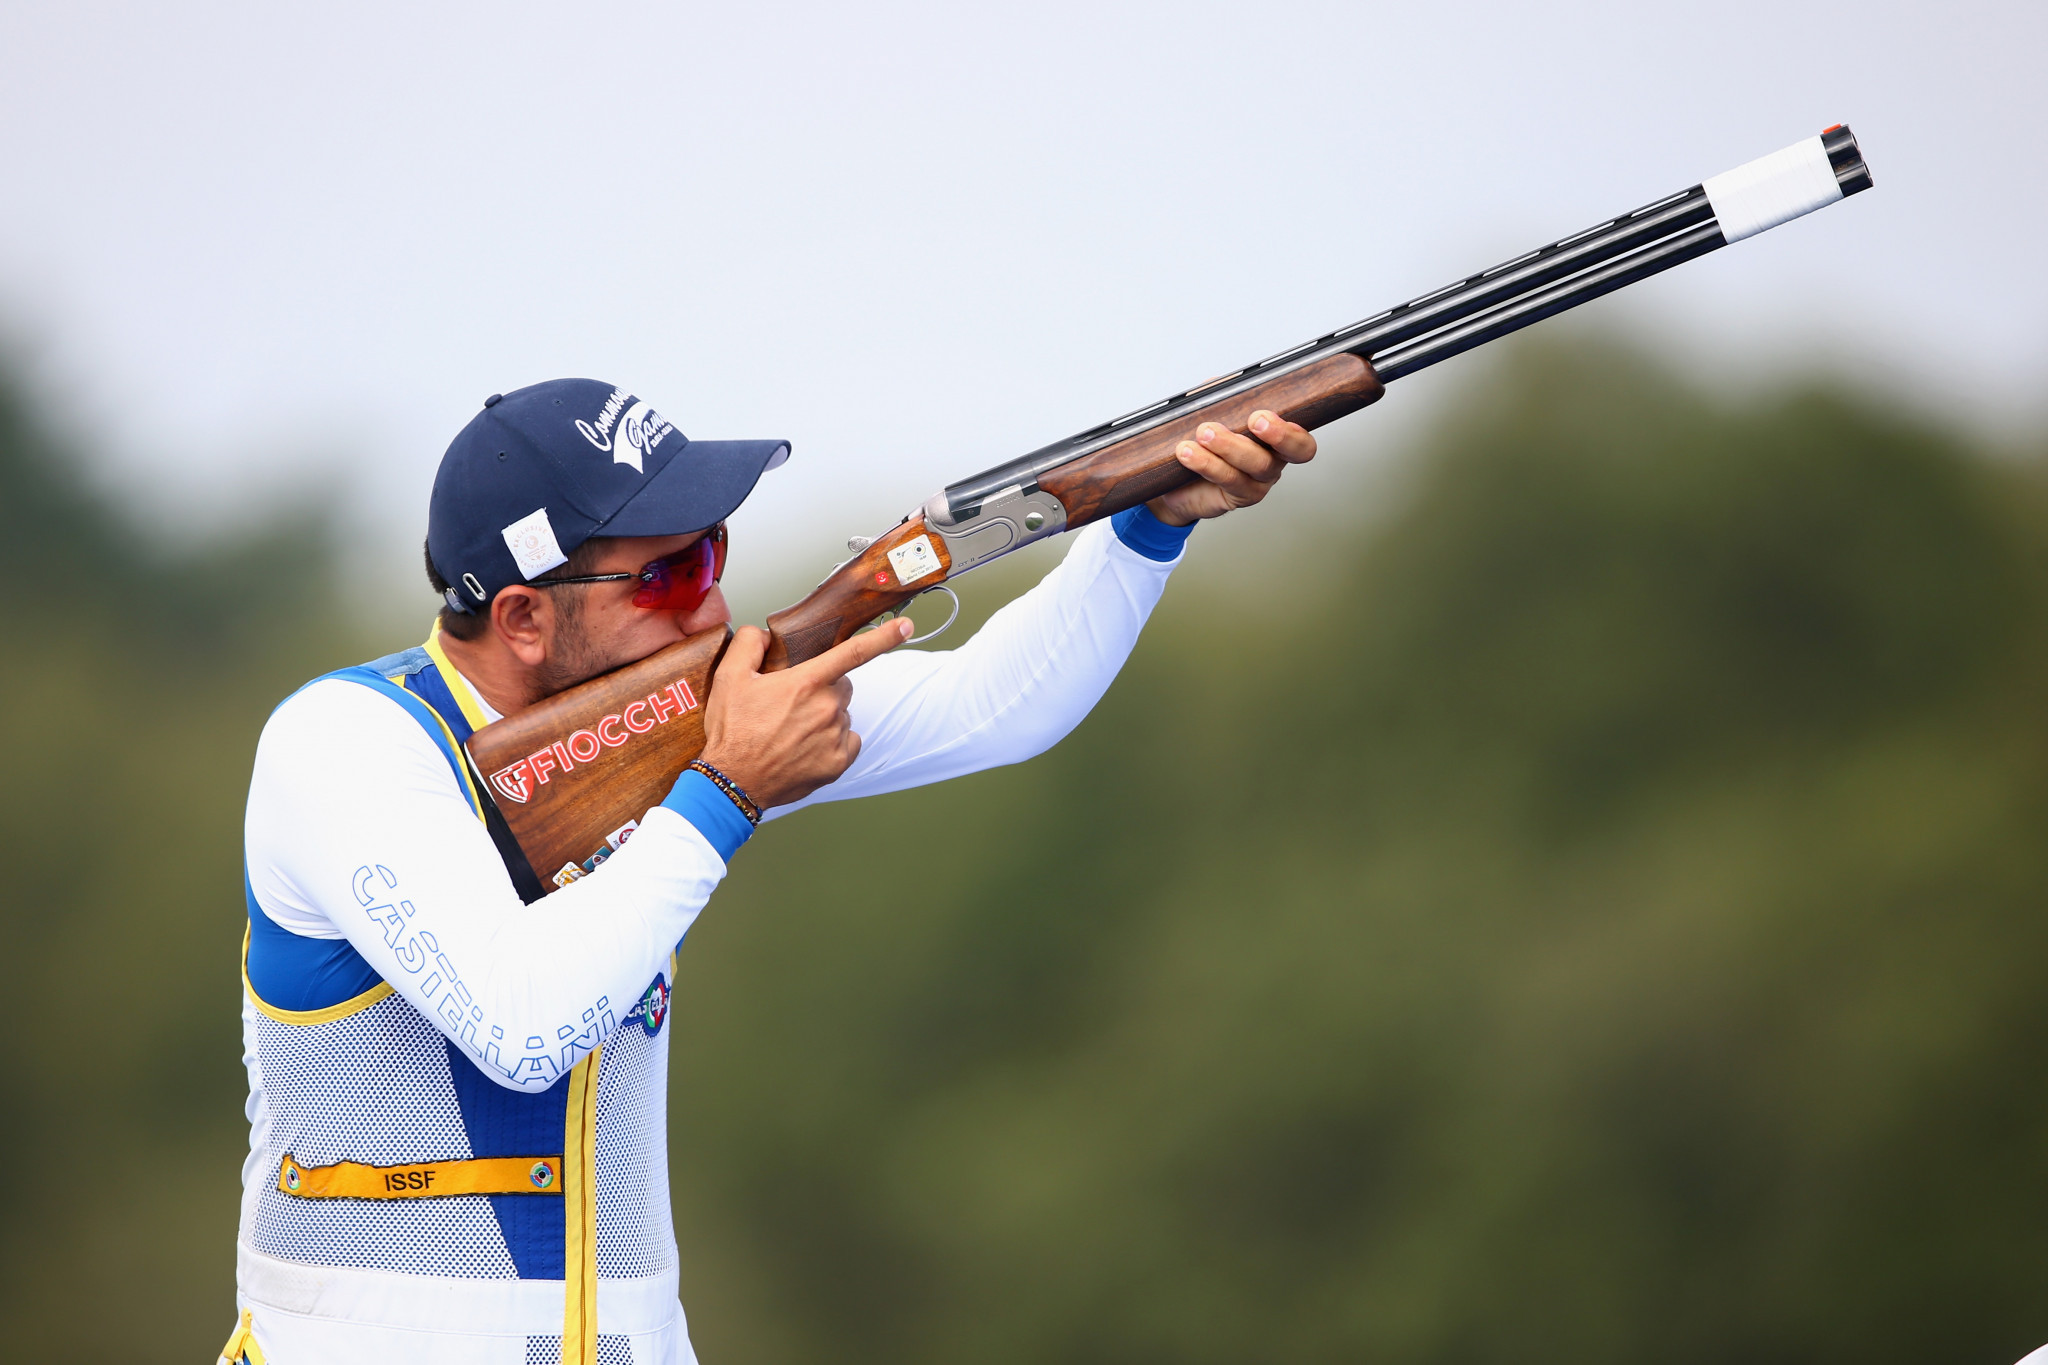 Georgios Achilleos will lead Cyprus' shooting team at Gold Coast 2018 ©Getty Images